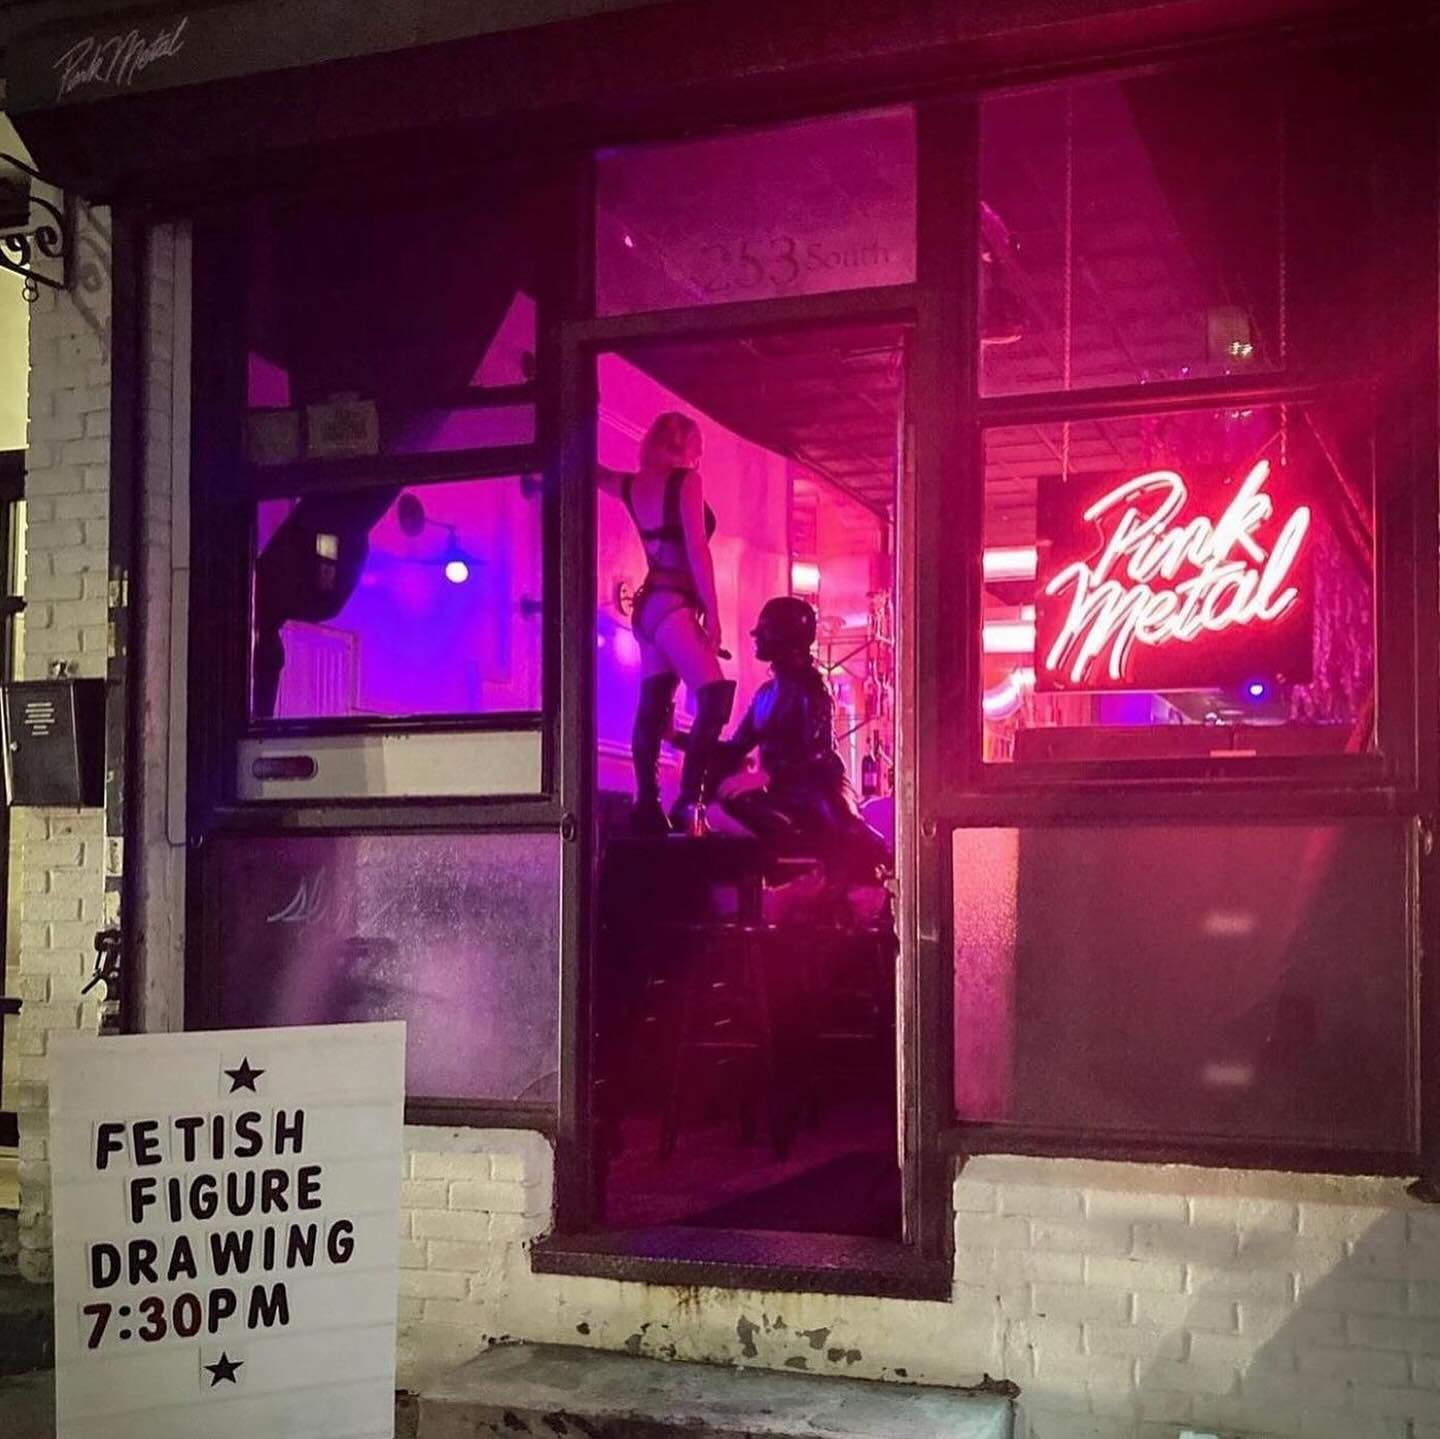 @fetishfiguredrawing tonight 7:30- 9:30&mdash; our weekly drink &amp; draw with a k!boy twist ✍🏼🪢 21+ &bull; no cover &bull; two drink minimum &bull; art supplies provided &bull; tips encouraged 🤍💸

LATE NIGHT happy hour 10:30- 12:30 🍹 @buyback_